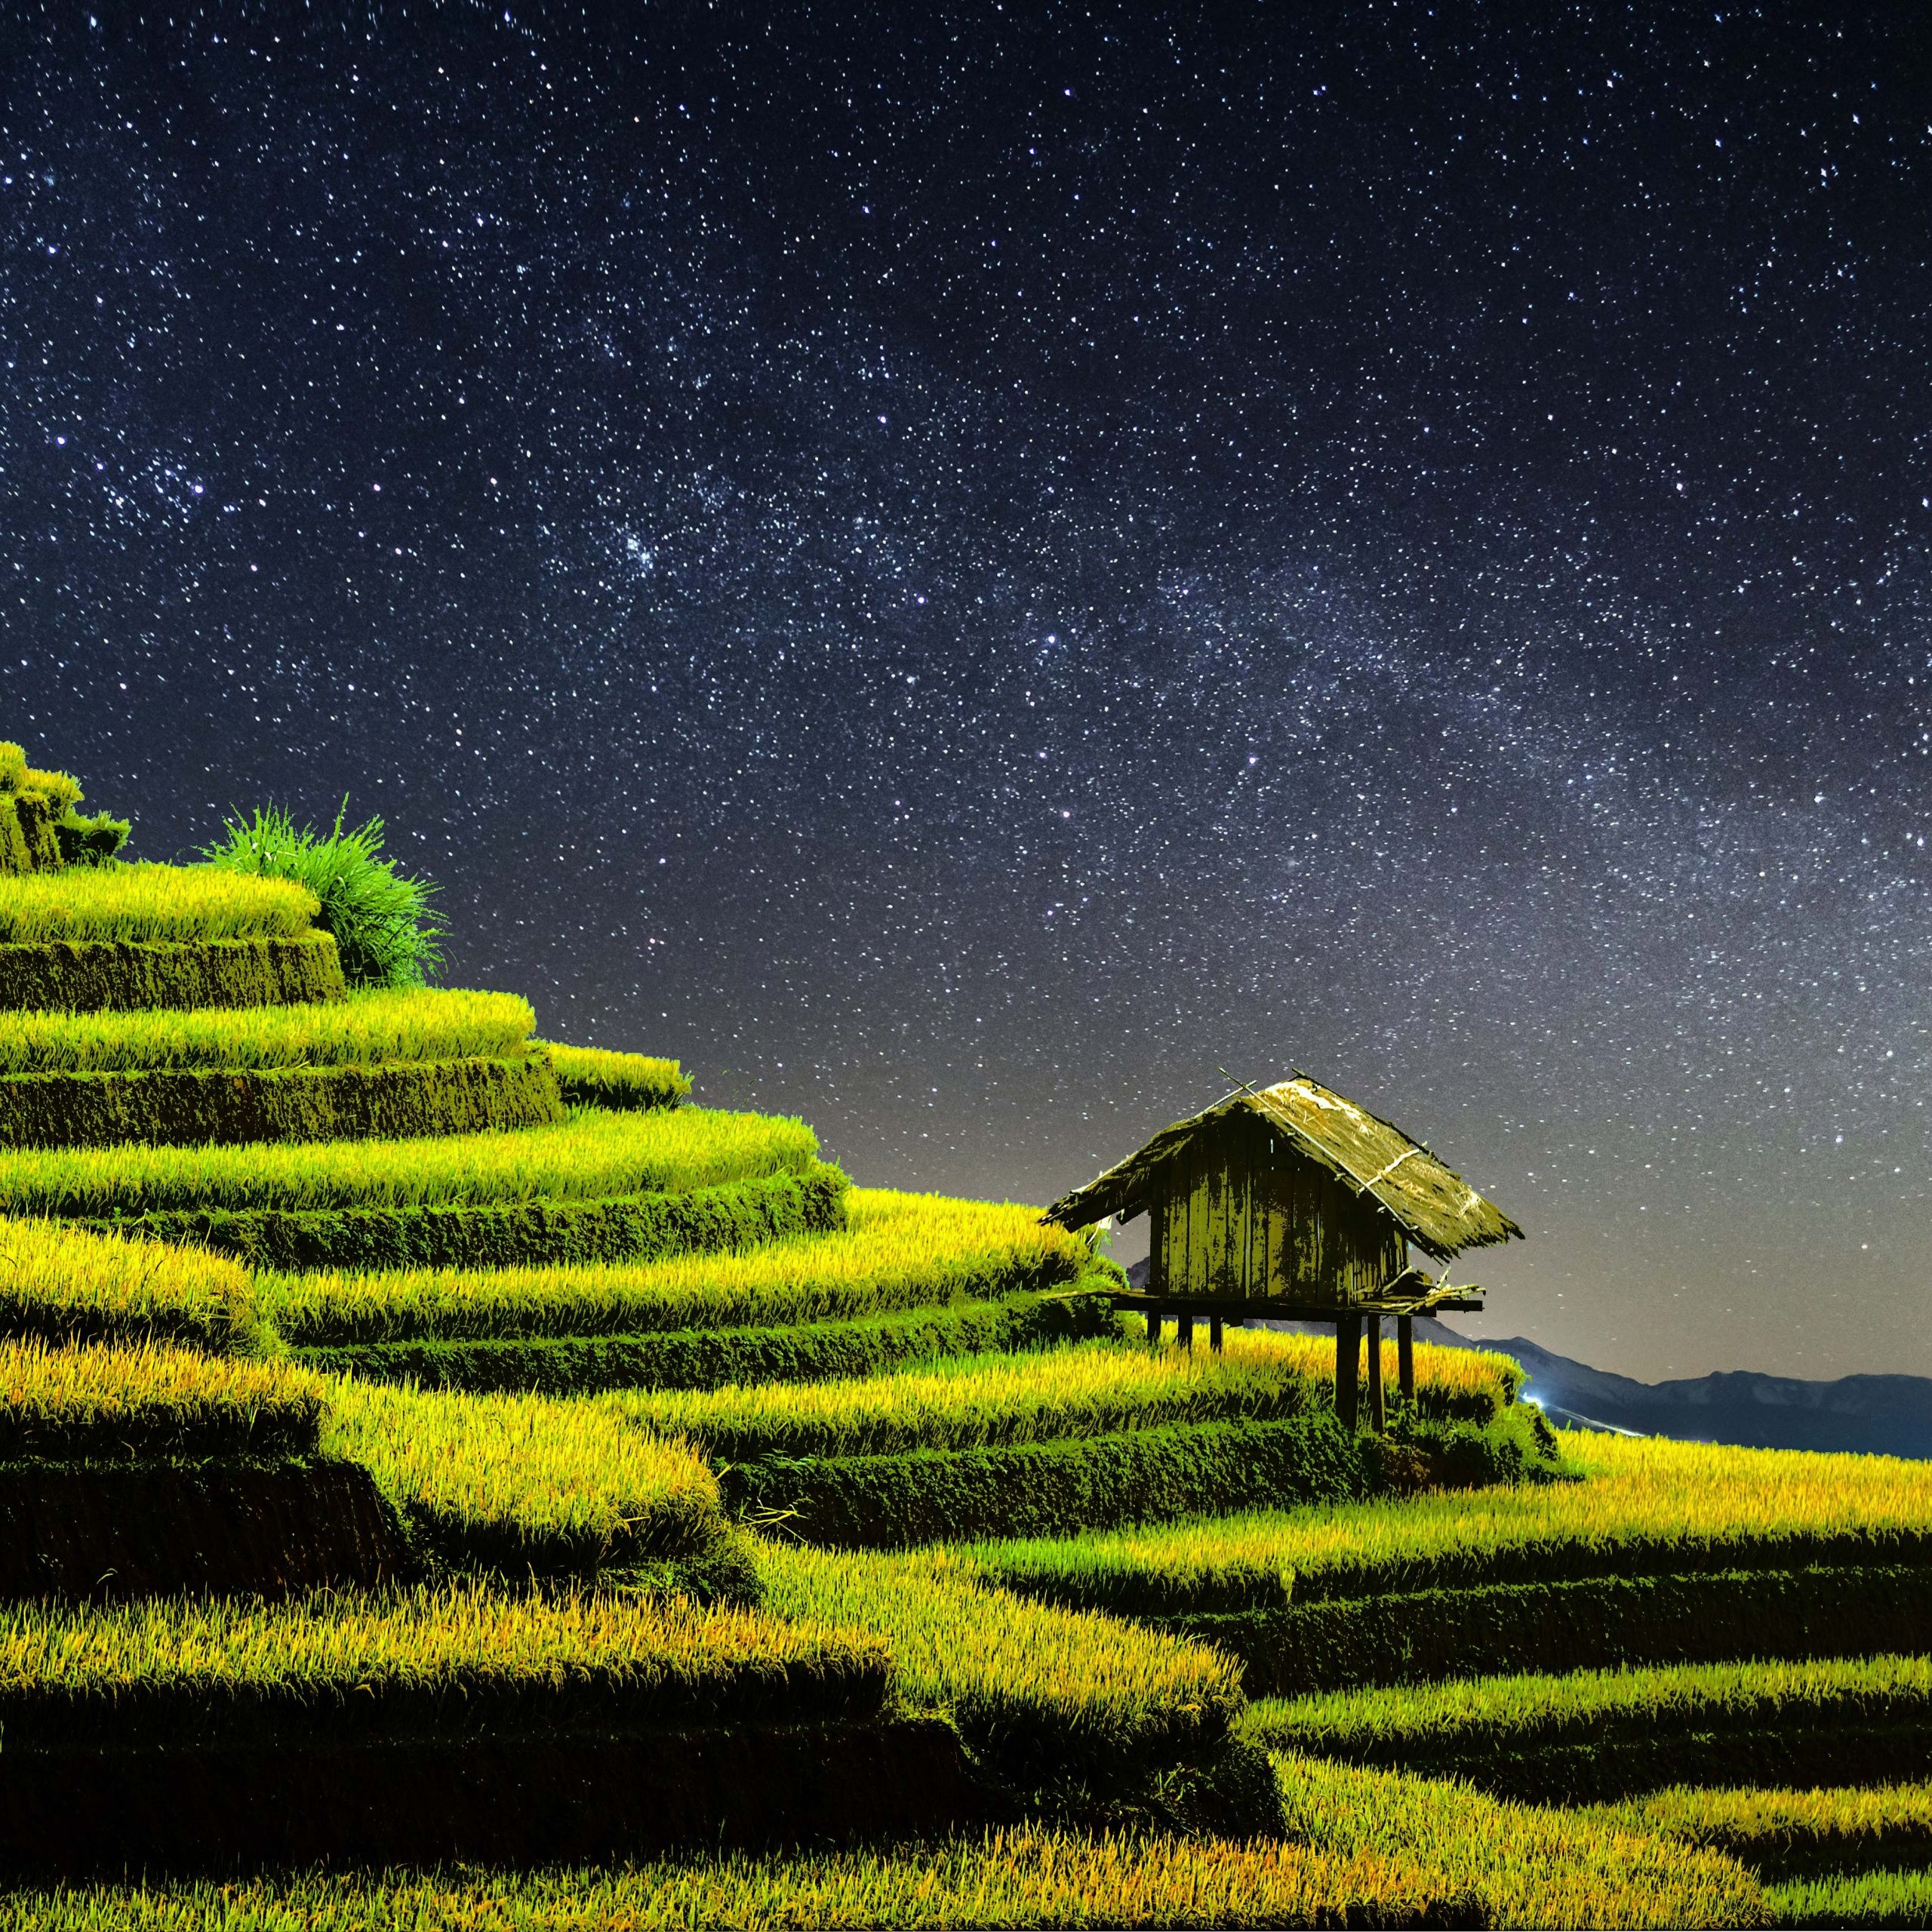 A field of rice with stars in the sky - Farm